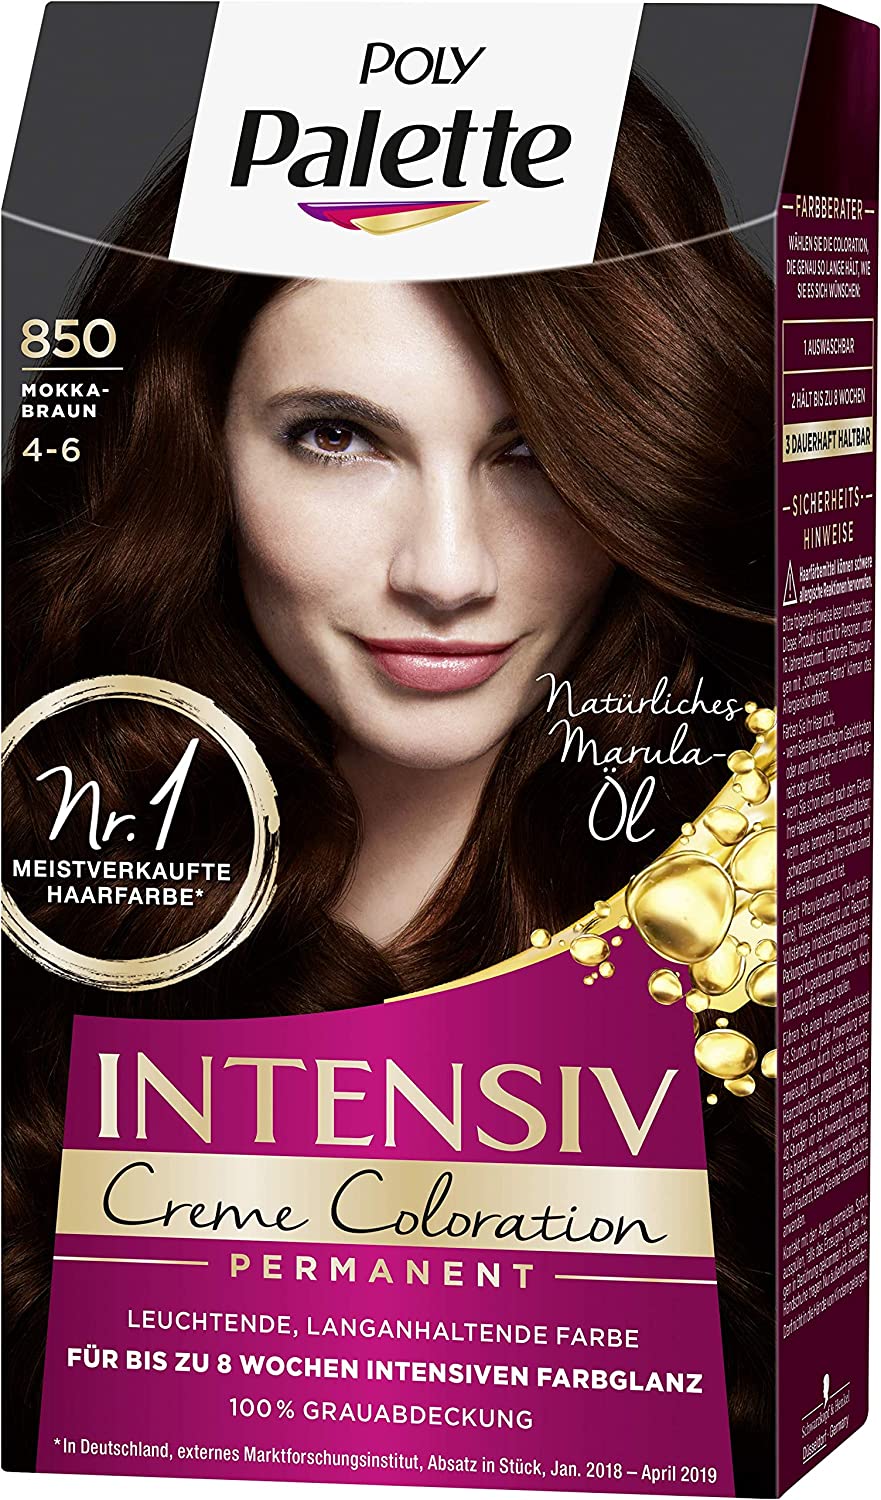 Schwarzkopf Poly Palette Intensive Cream Colouration 850/4-6 Mocha Brown Pack of 3 x 128 ml, ‎brown